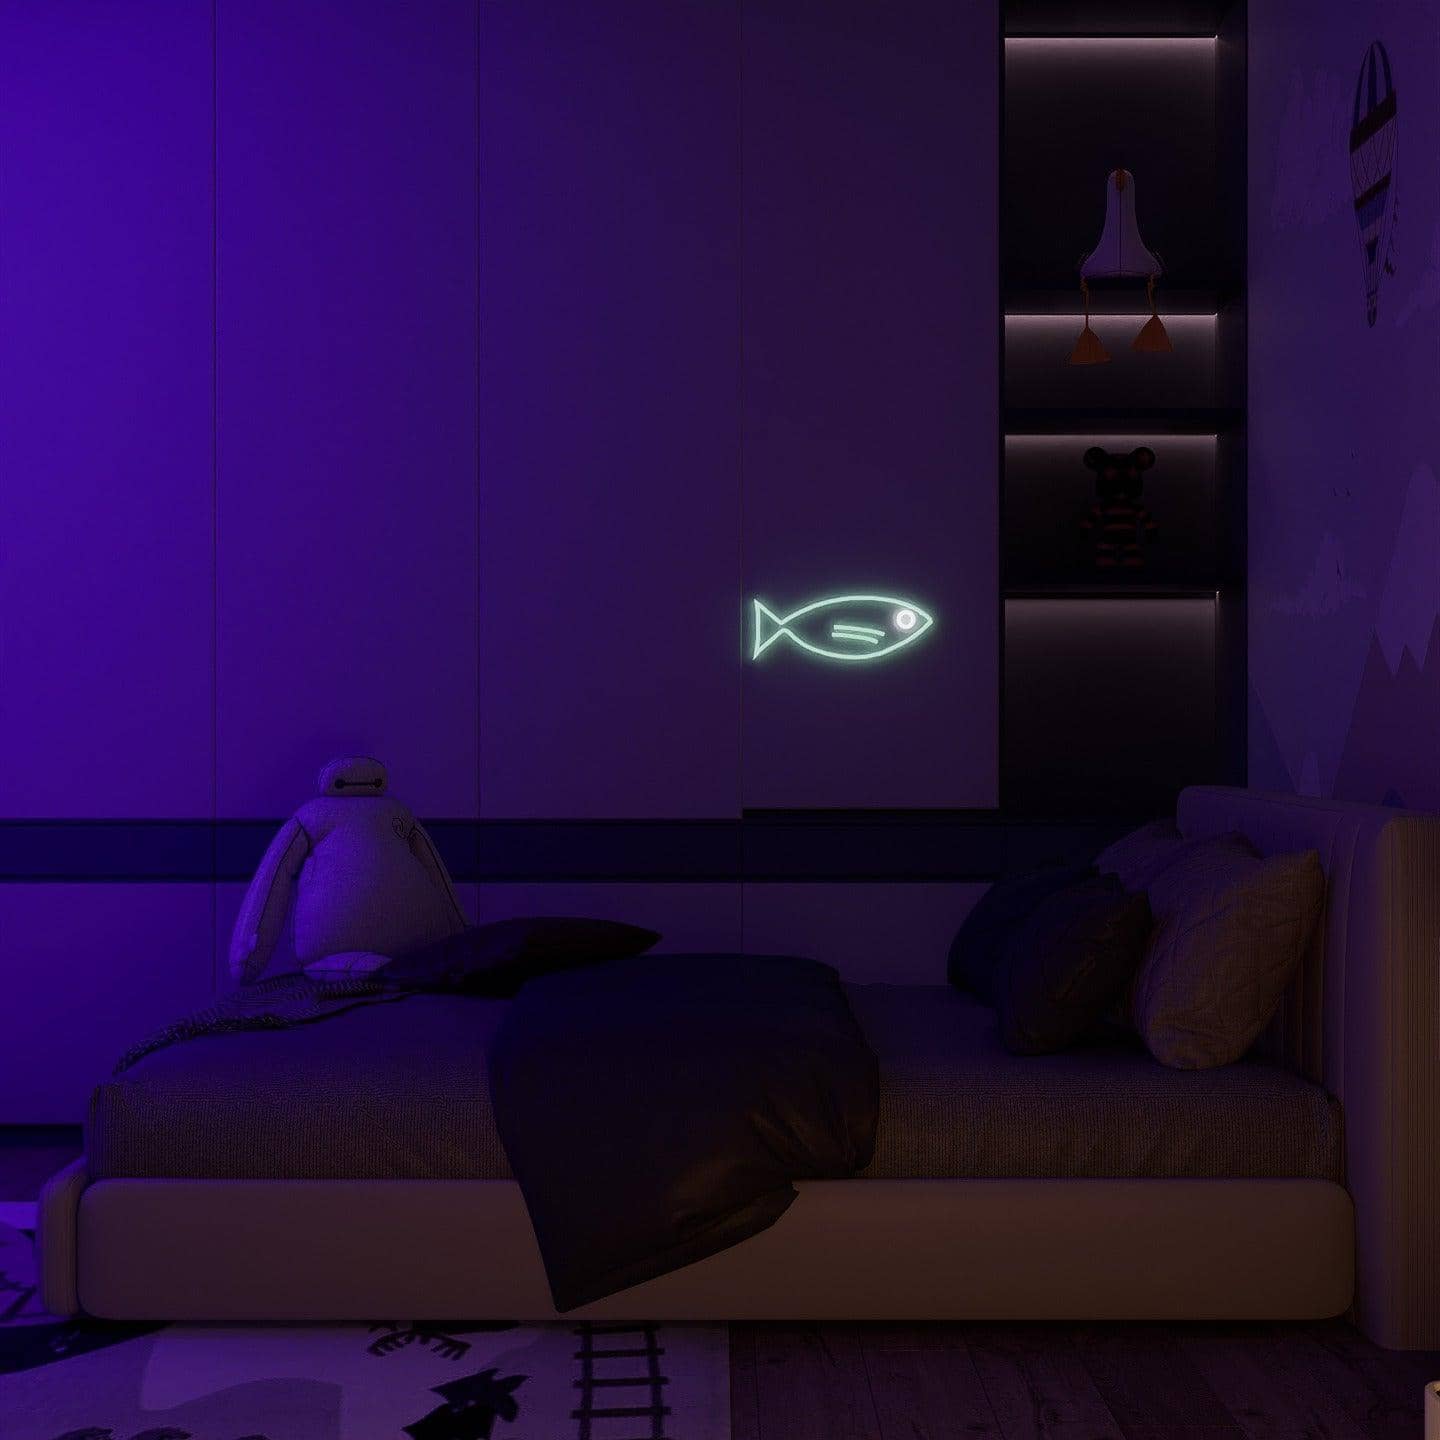 light-up-neon-lights-and-hang-them-in-your-bedroom-for-display-fishyfriendteal